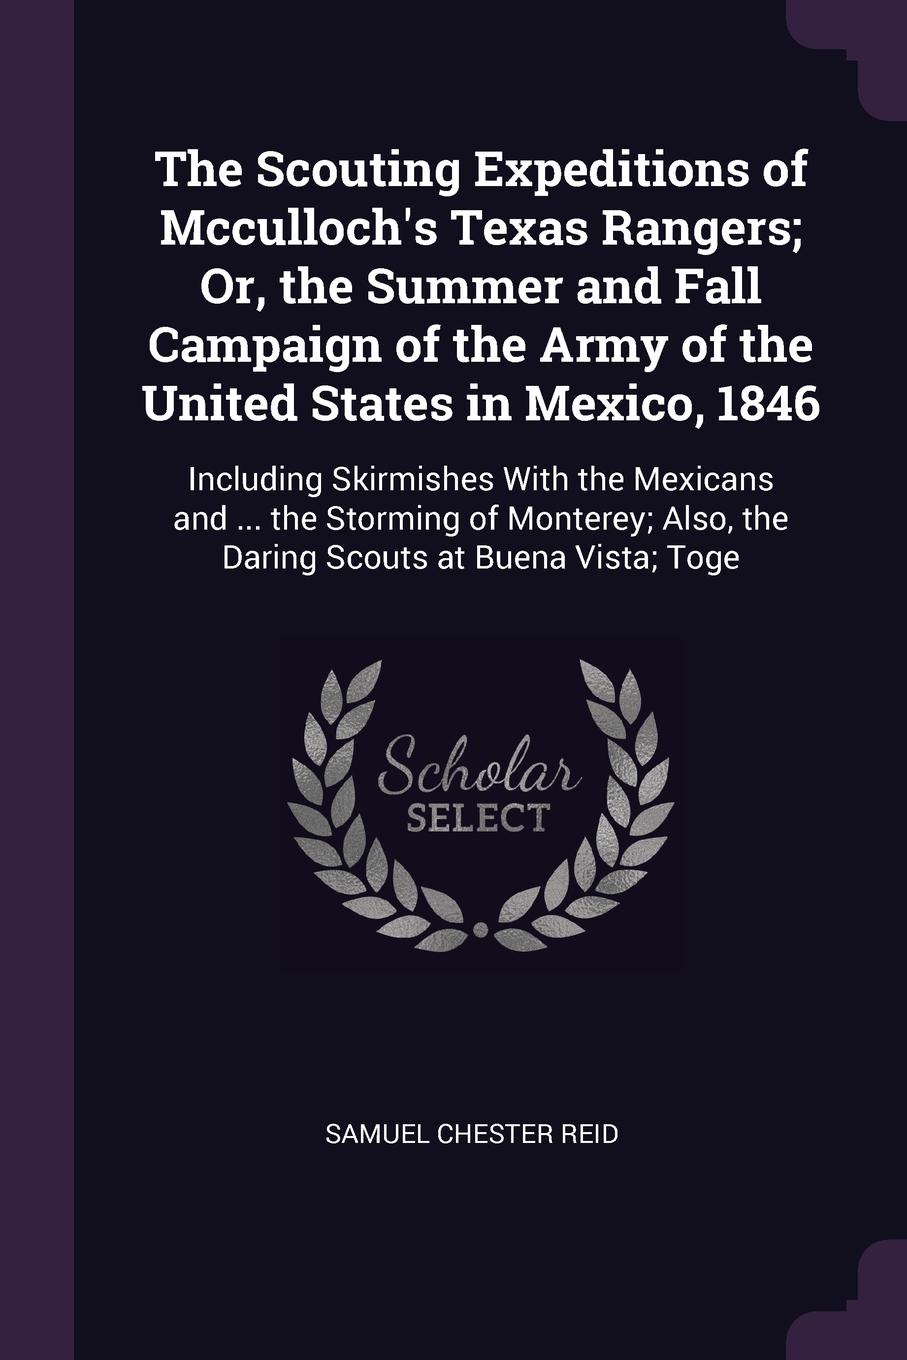 The Scouting Expeditions of Mcculloch`s Texas Rangers; Or, the Summer and Fall Campaign of the Army of the United States in Mexico, 1846. Including Skirmishes With the Mexicans and ... the Storming of Monterey; Also, the Daring Scouts at Buena Vis...